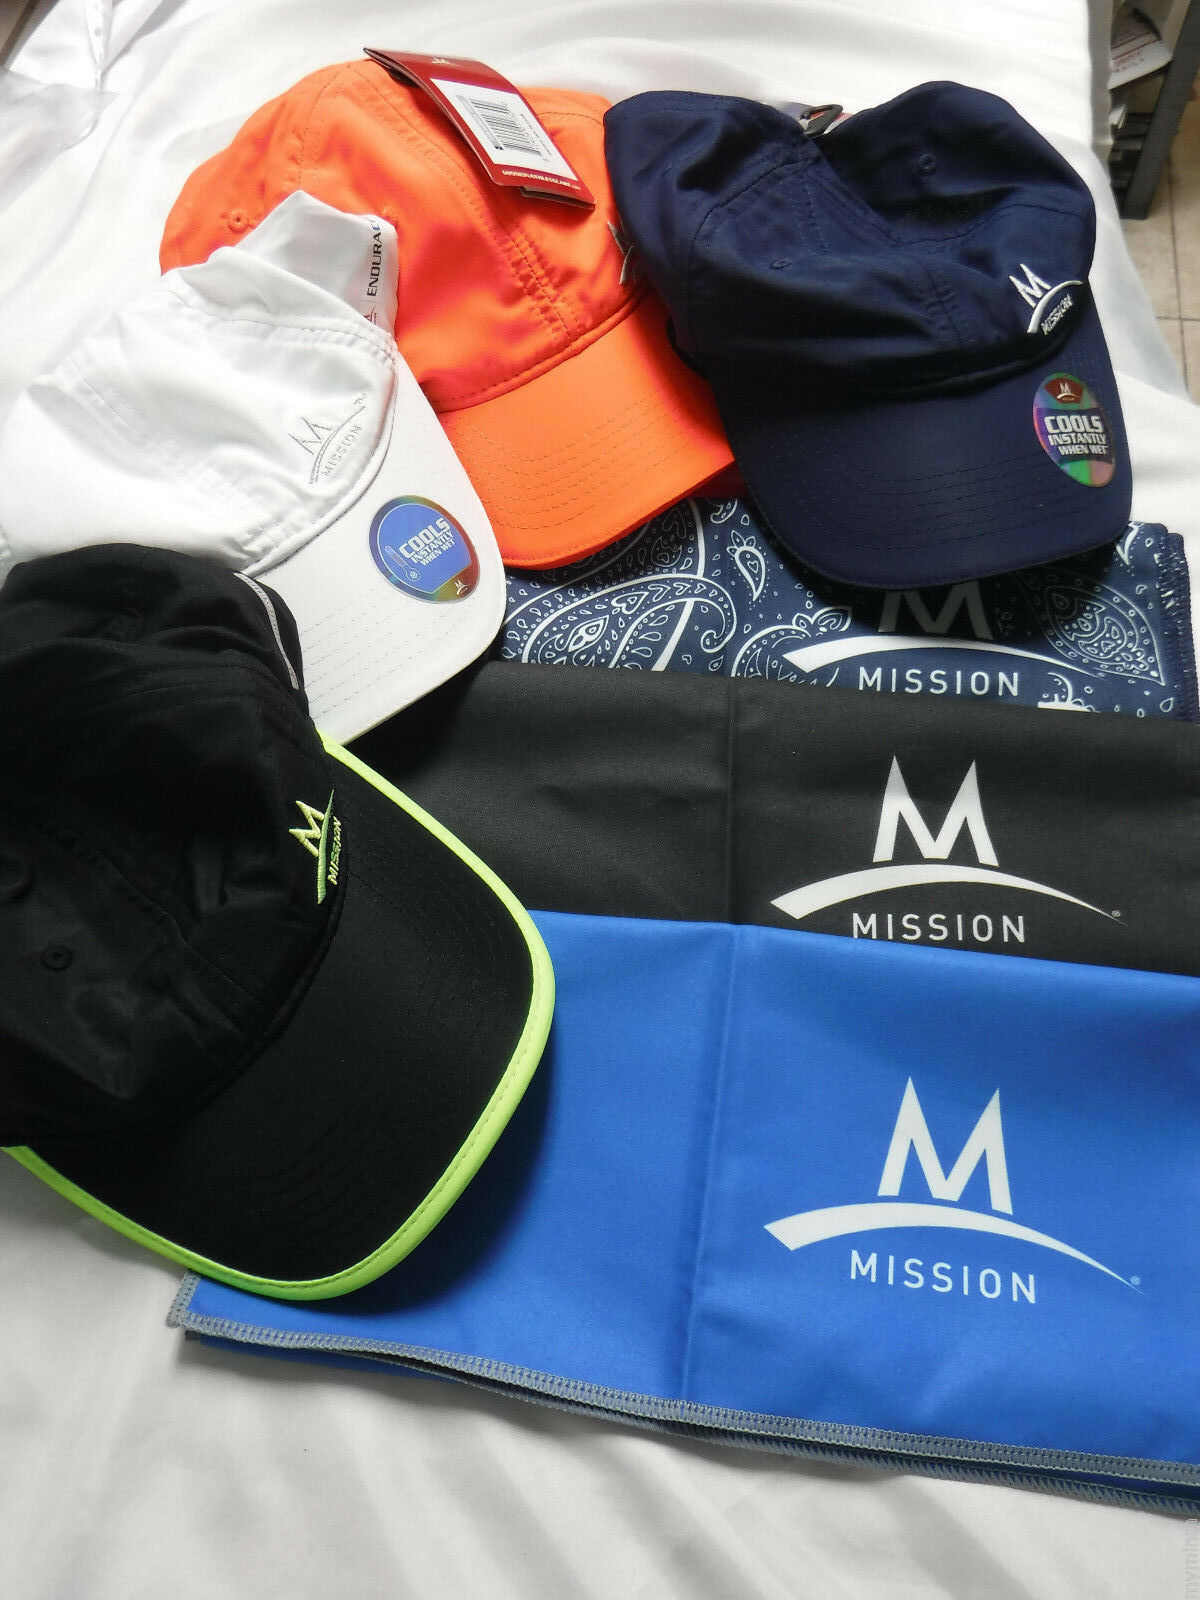 Mission Enduracool Multi Cool Baseball Cap Your Choice & Free Mission Towel /x@